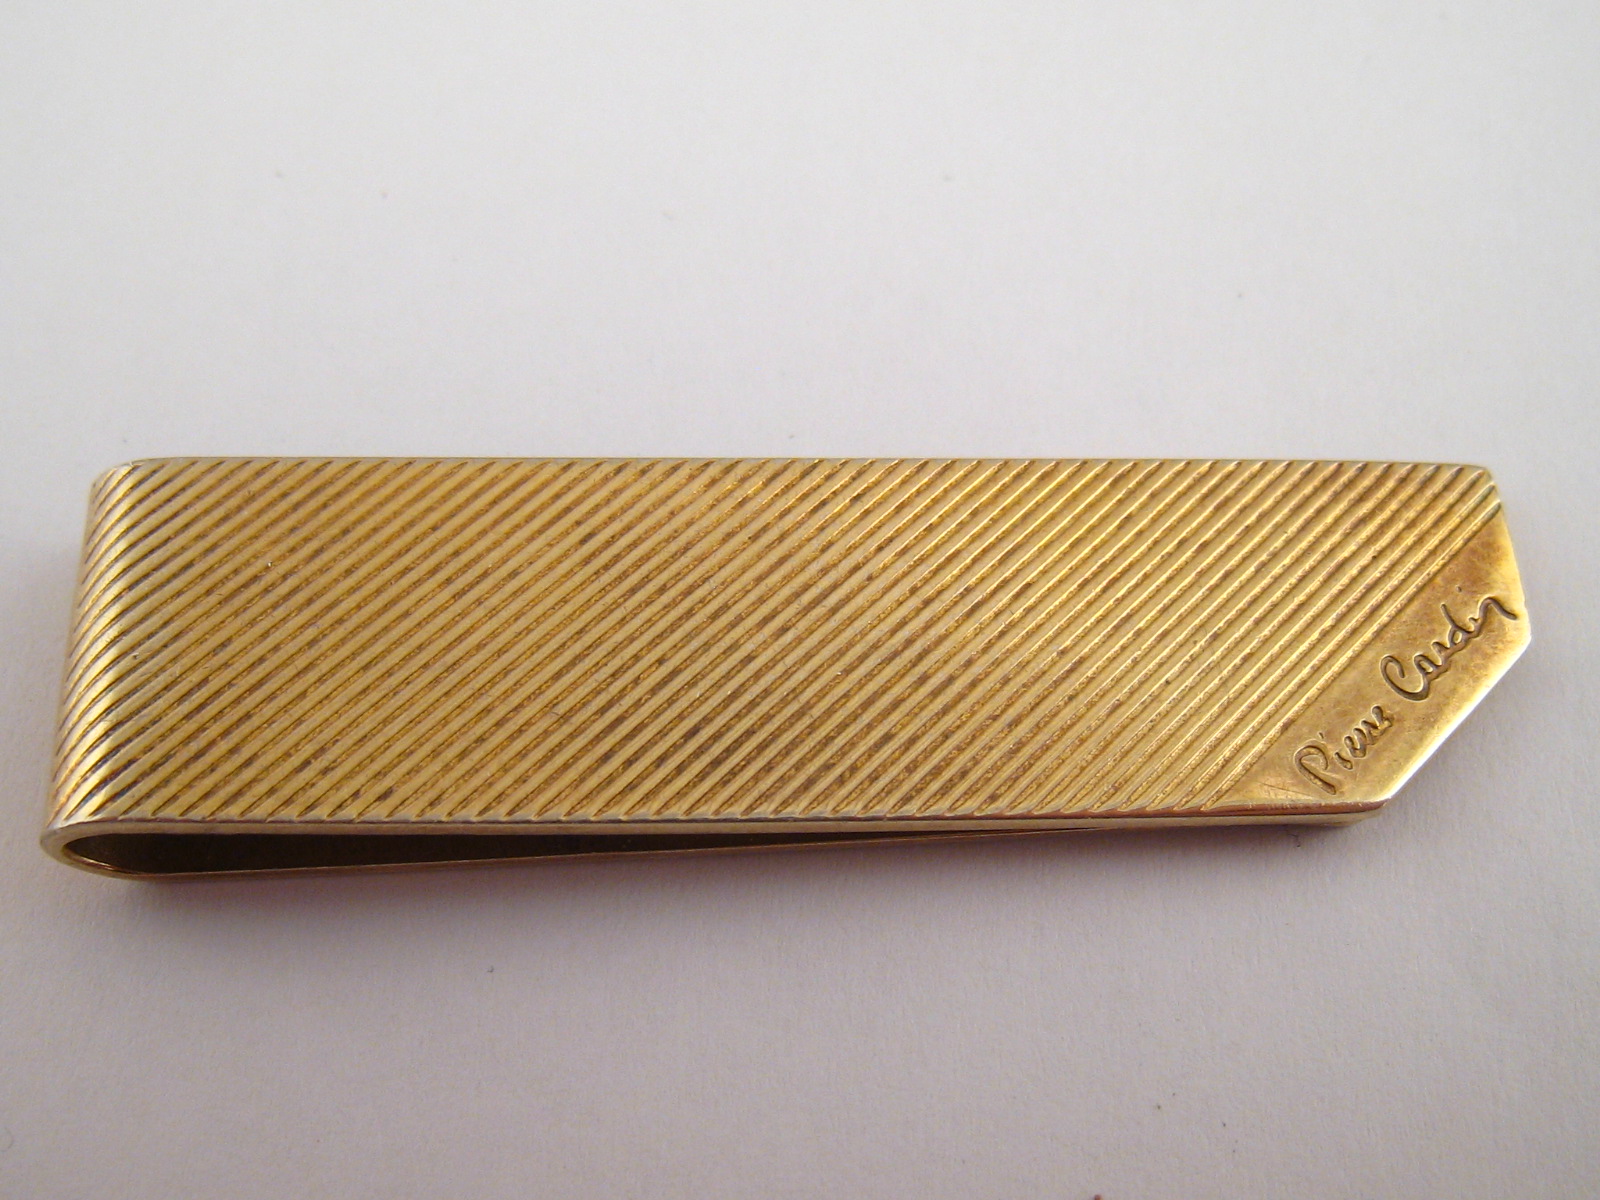 A gilt metal (tests silver) money clip, signed Pierre Cardin, approx. 5.5cm, 17.4 grams.